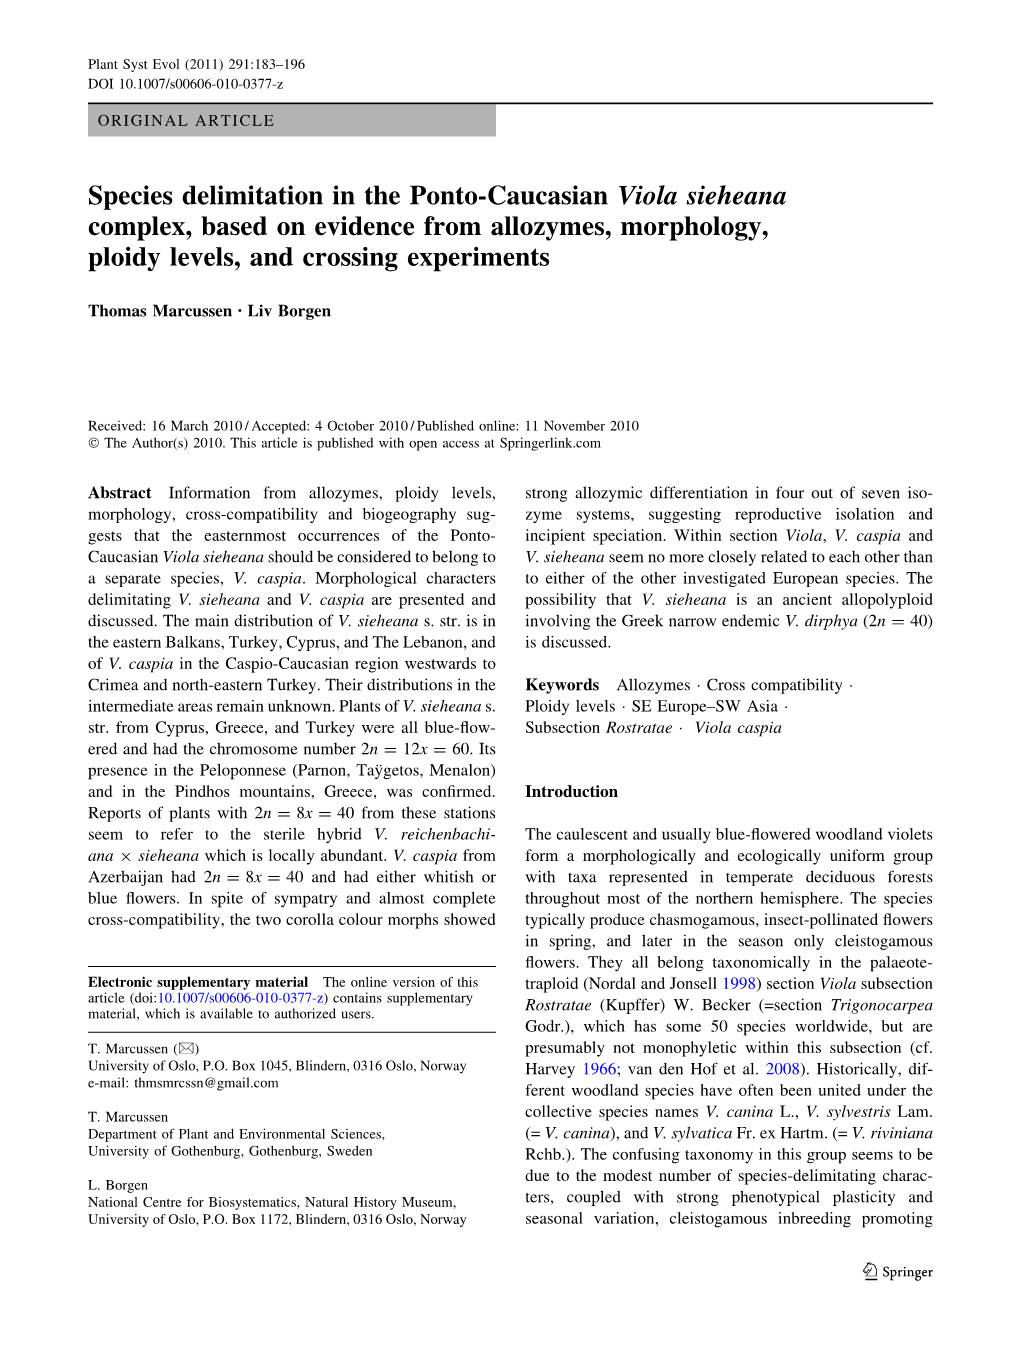 Species Delimitation in the Ponto-Caucasian Viola Sieheana Complex, Based on Evidence from Allozymes, Morphology, Ploidy Levels, and Crossing Experiments